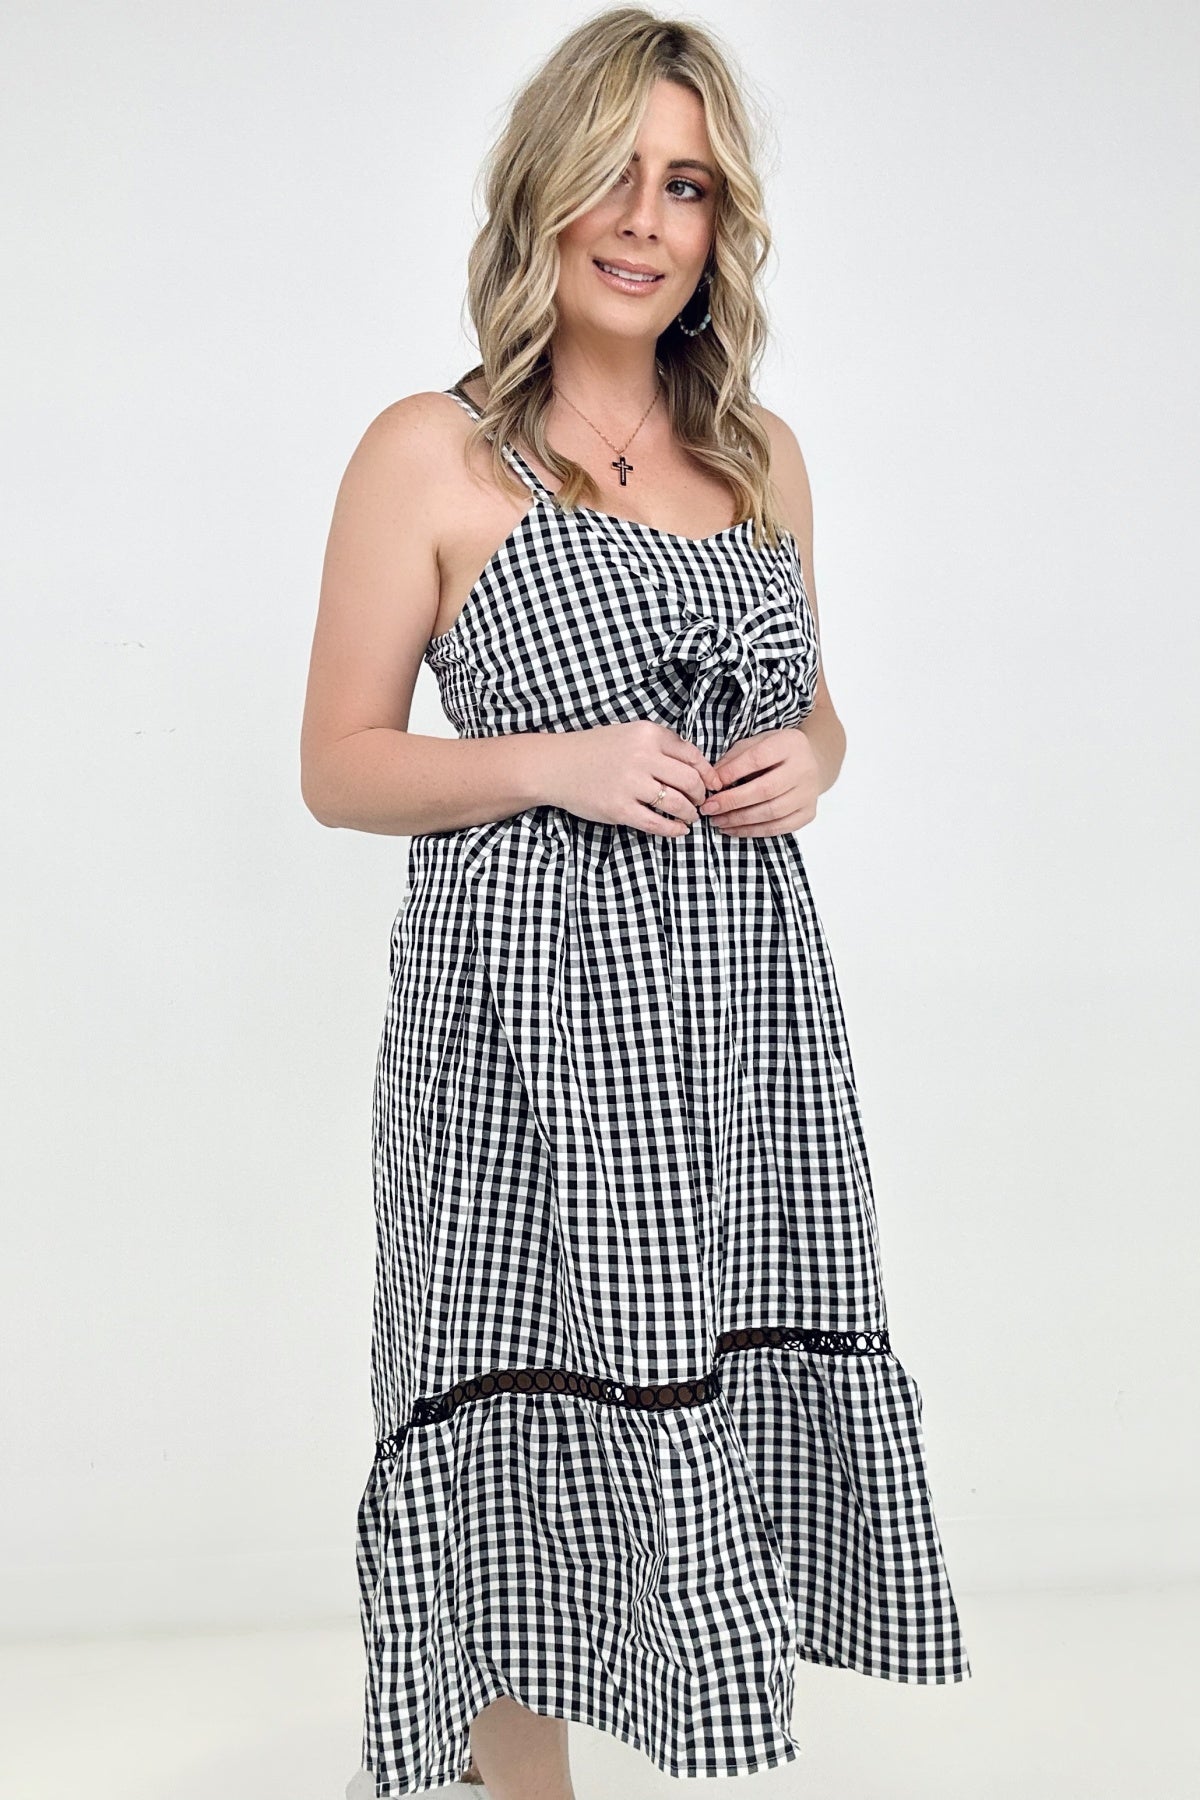 BETTER THAN YOU KNOW PLAID WOVEN DRESS